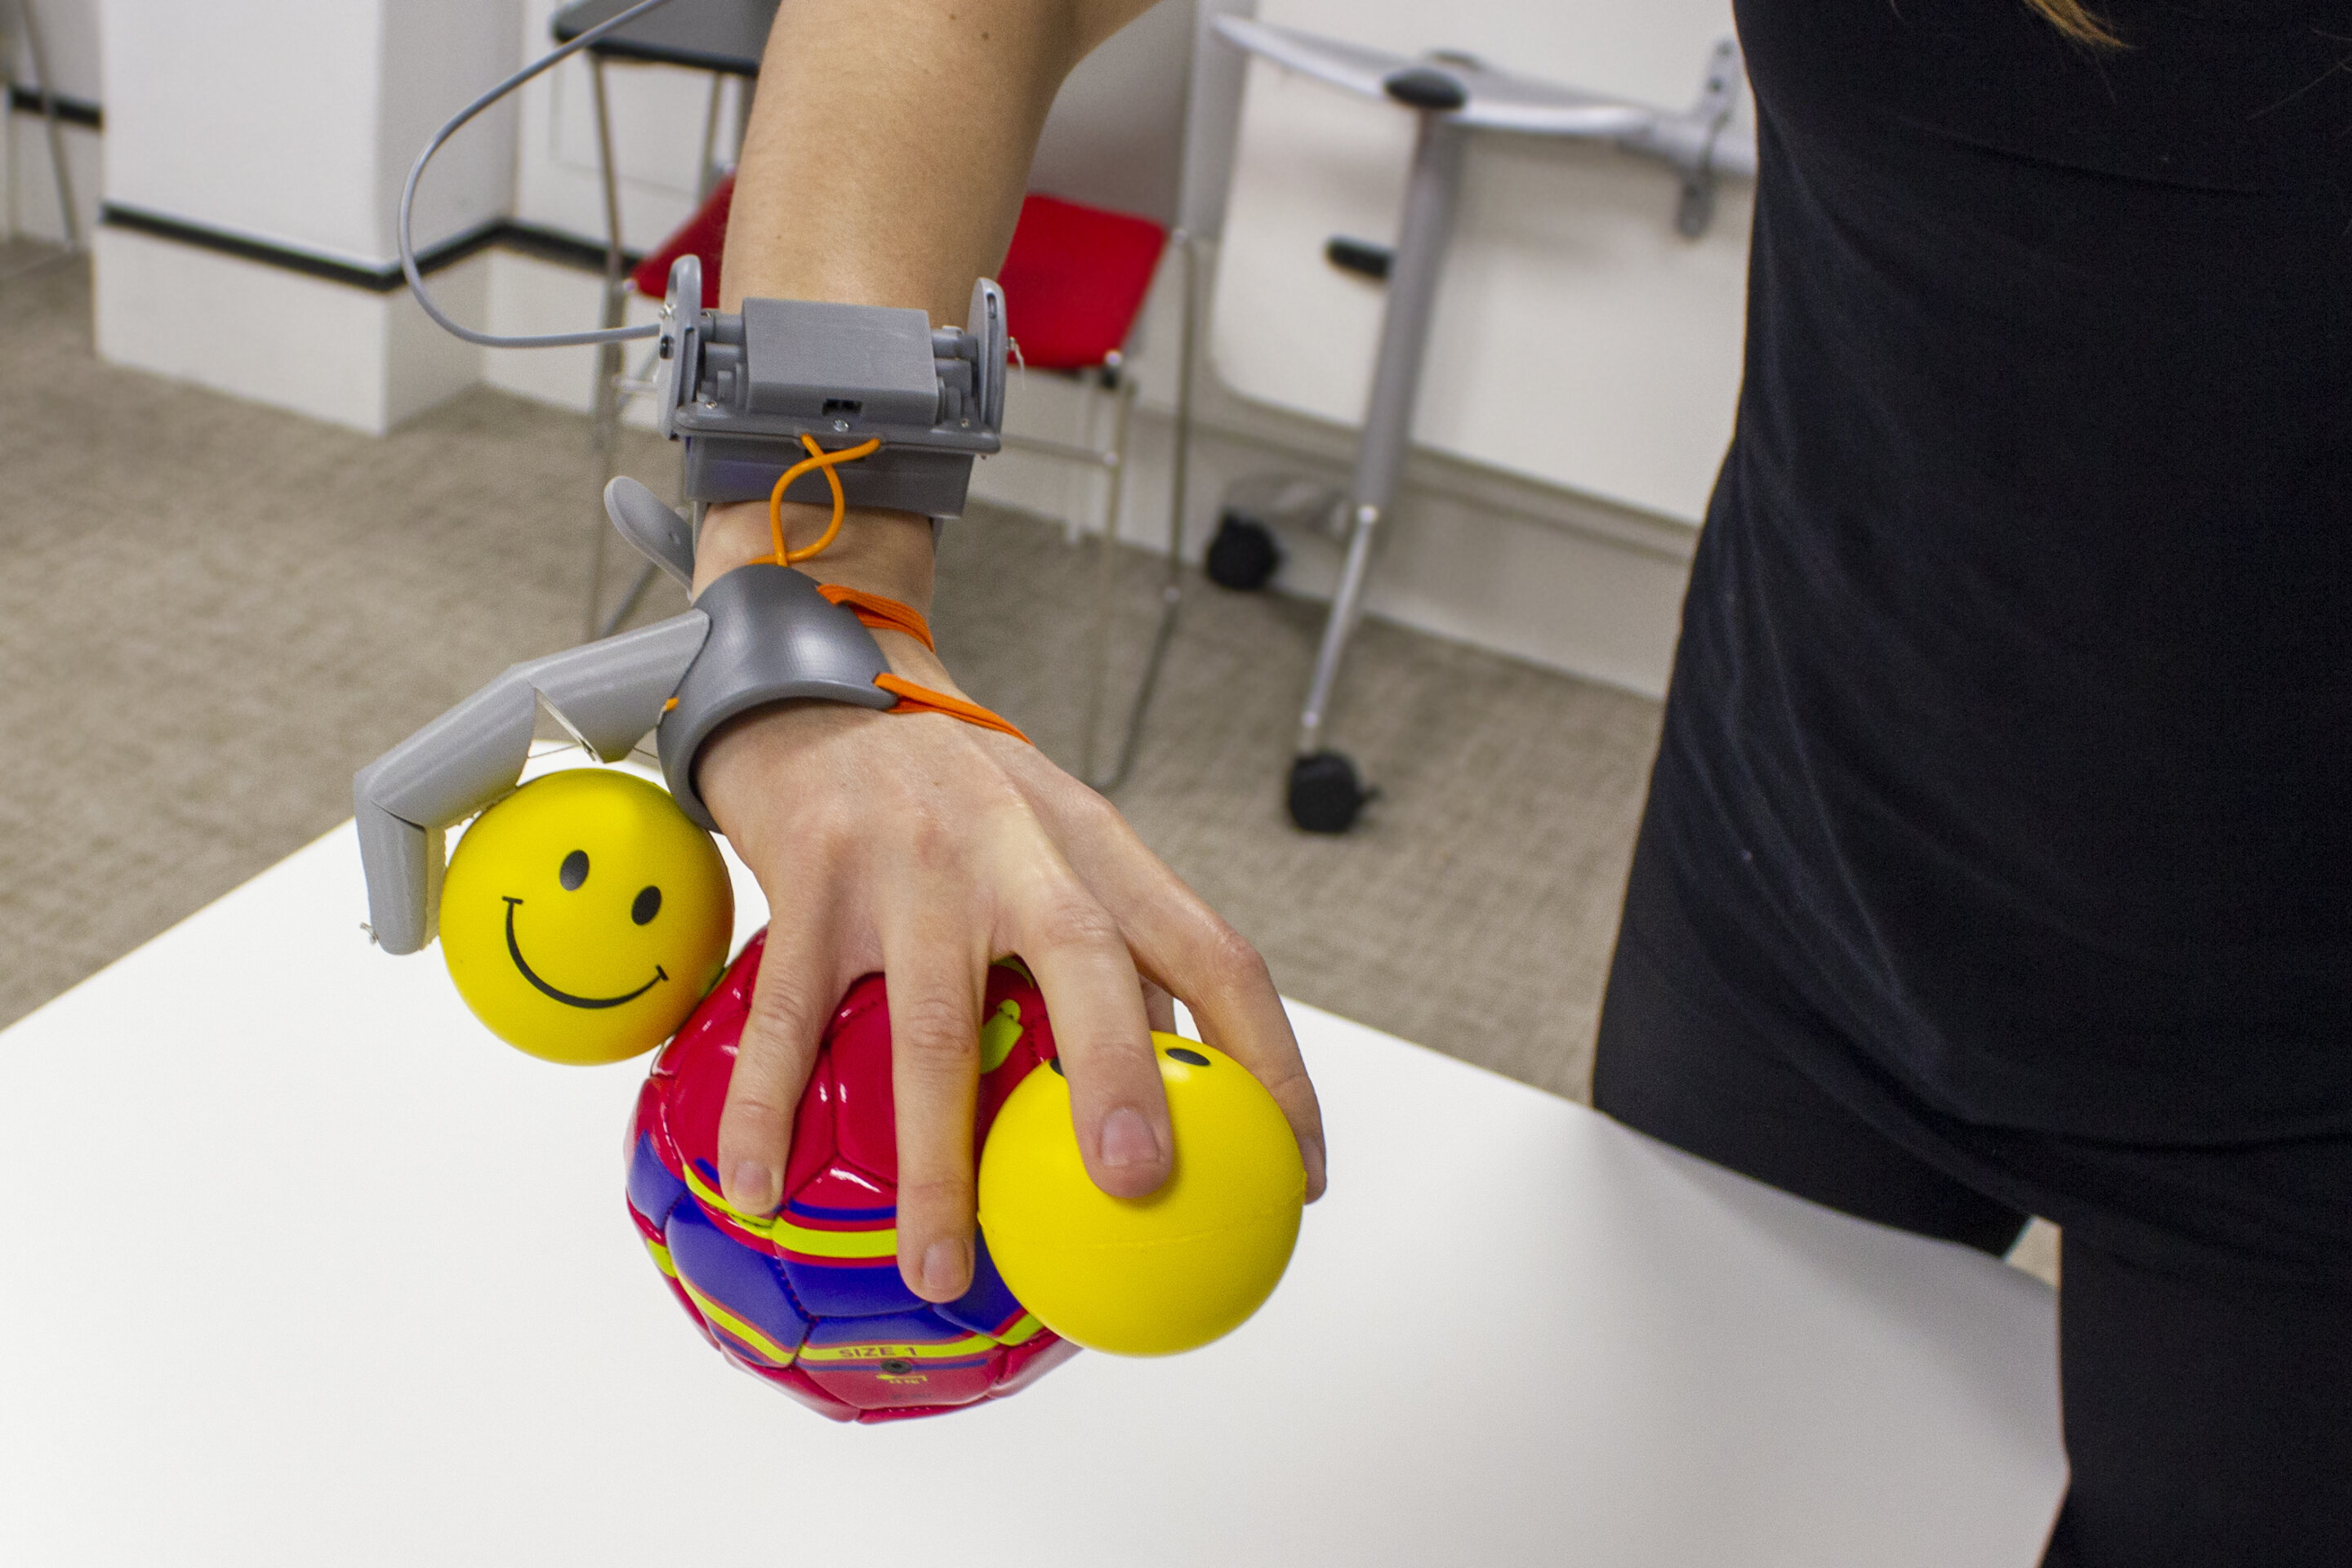 Robotics can give people 3rd thumb, but how will brain react? - Image